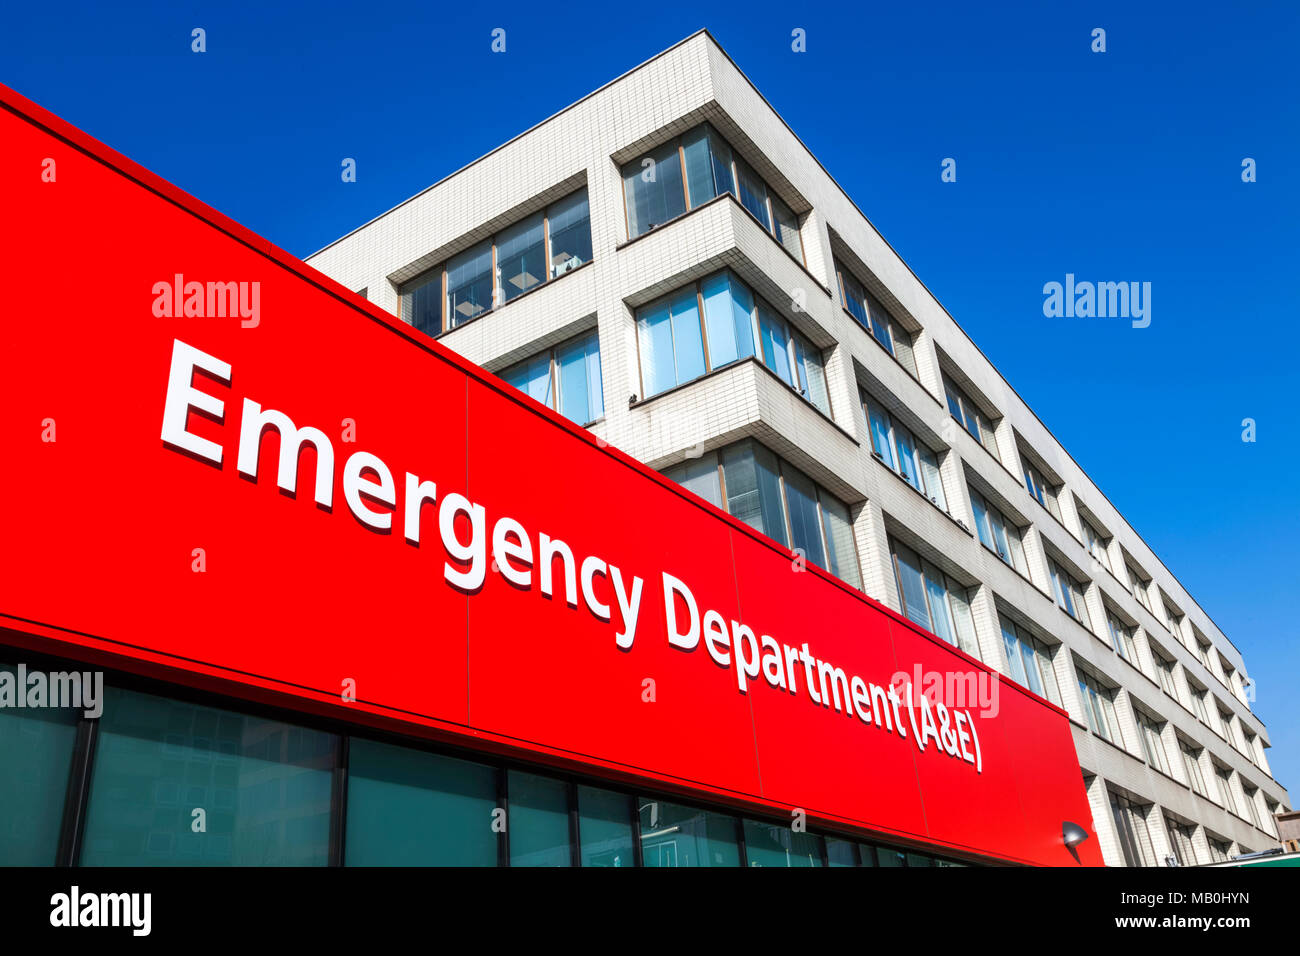 England, London, St.Thomas's Hospital, Accident and Emergency Sign Stock Photo